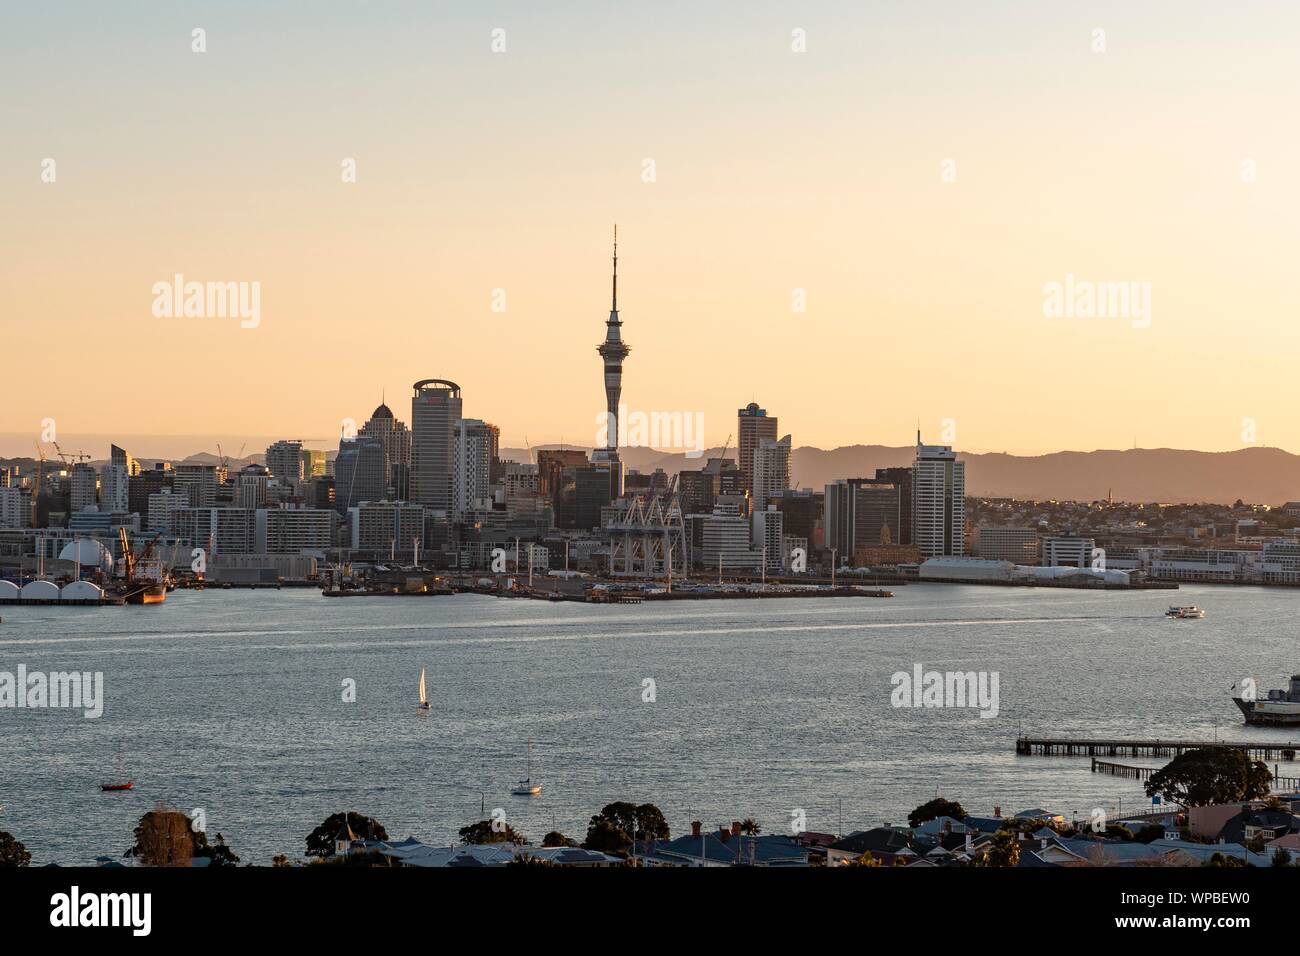 Skyline of Auckland at sunset, Waitemata Harbour, Sky Tower, Central Business District, Auckland, North Island, New Zealand Stock Photo